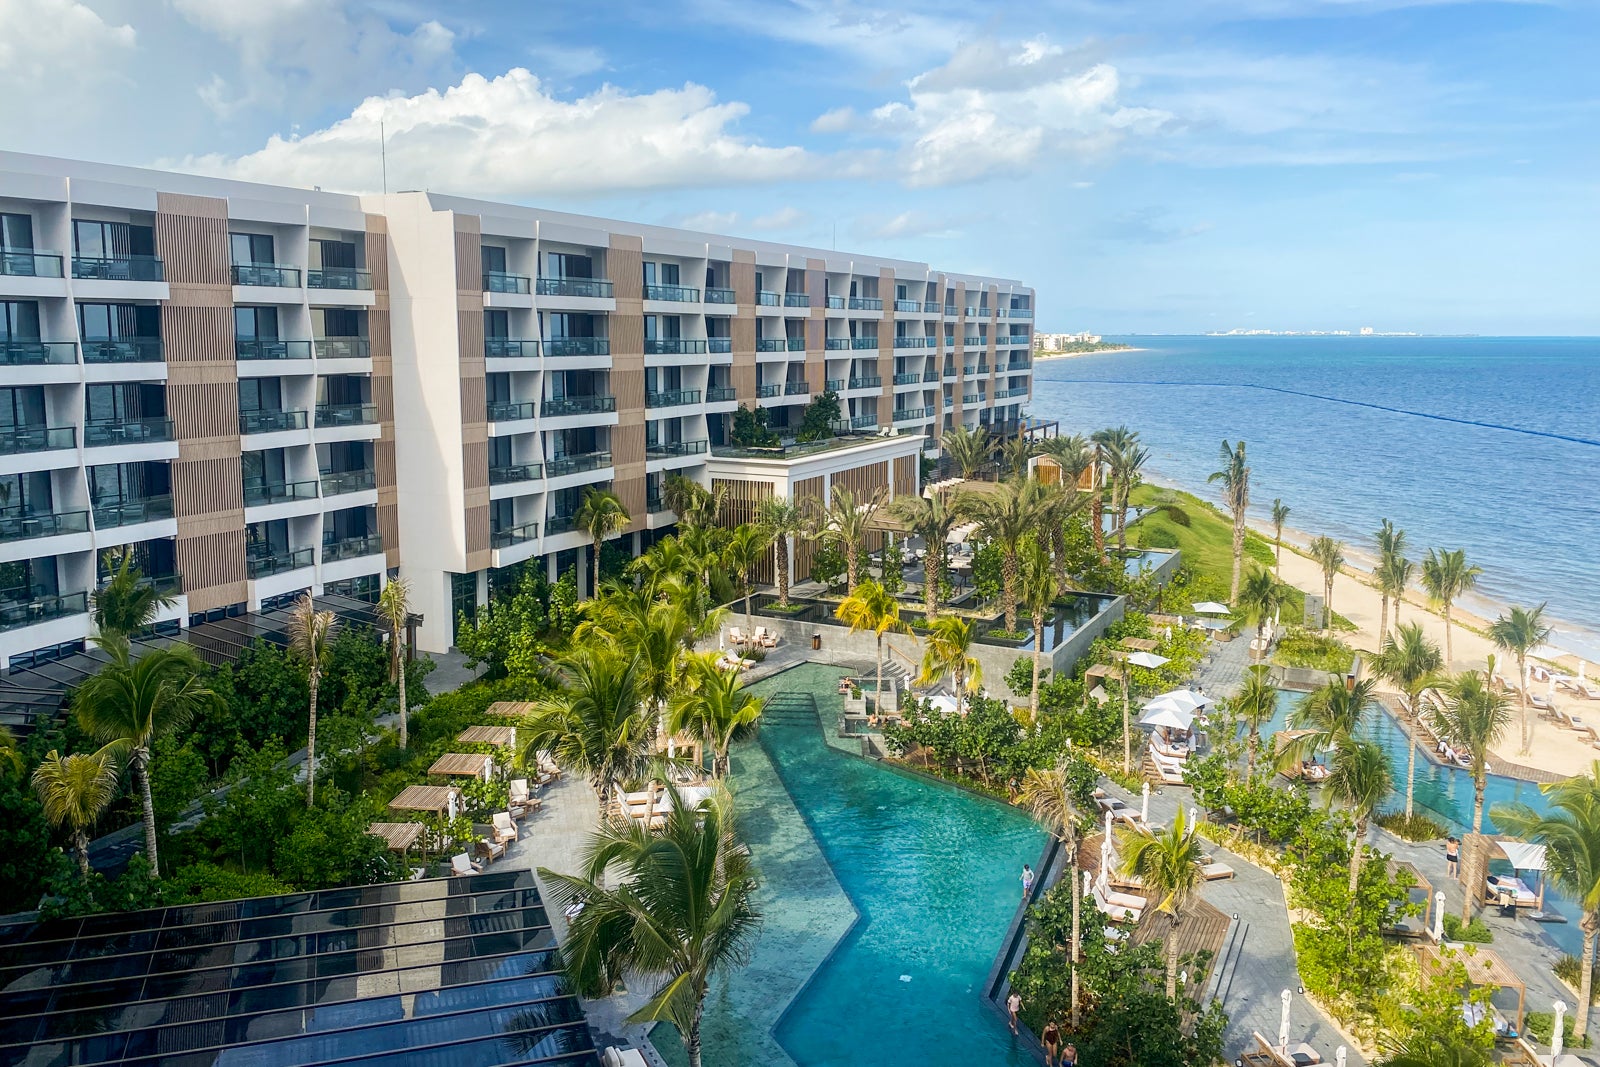 A luxurious oasis with impeccable service and style: My stay at the new Waldorf Astoria Cancun